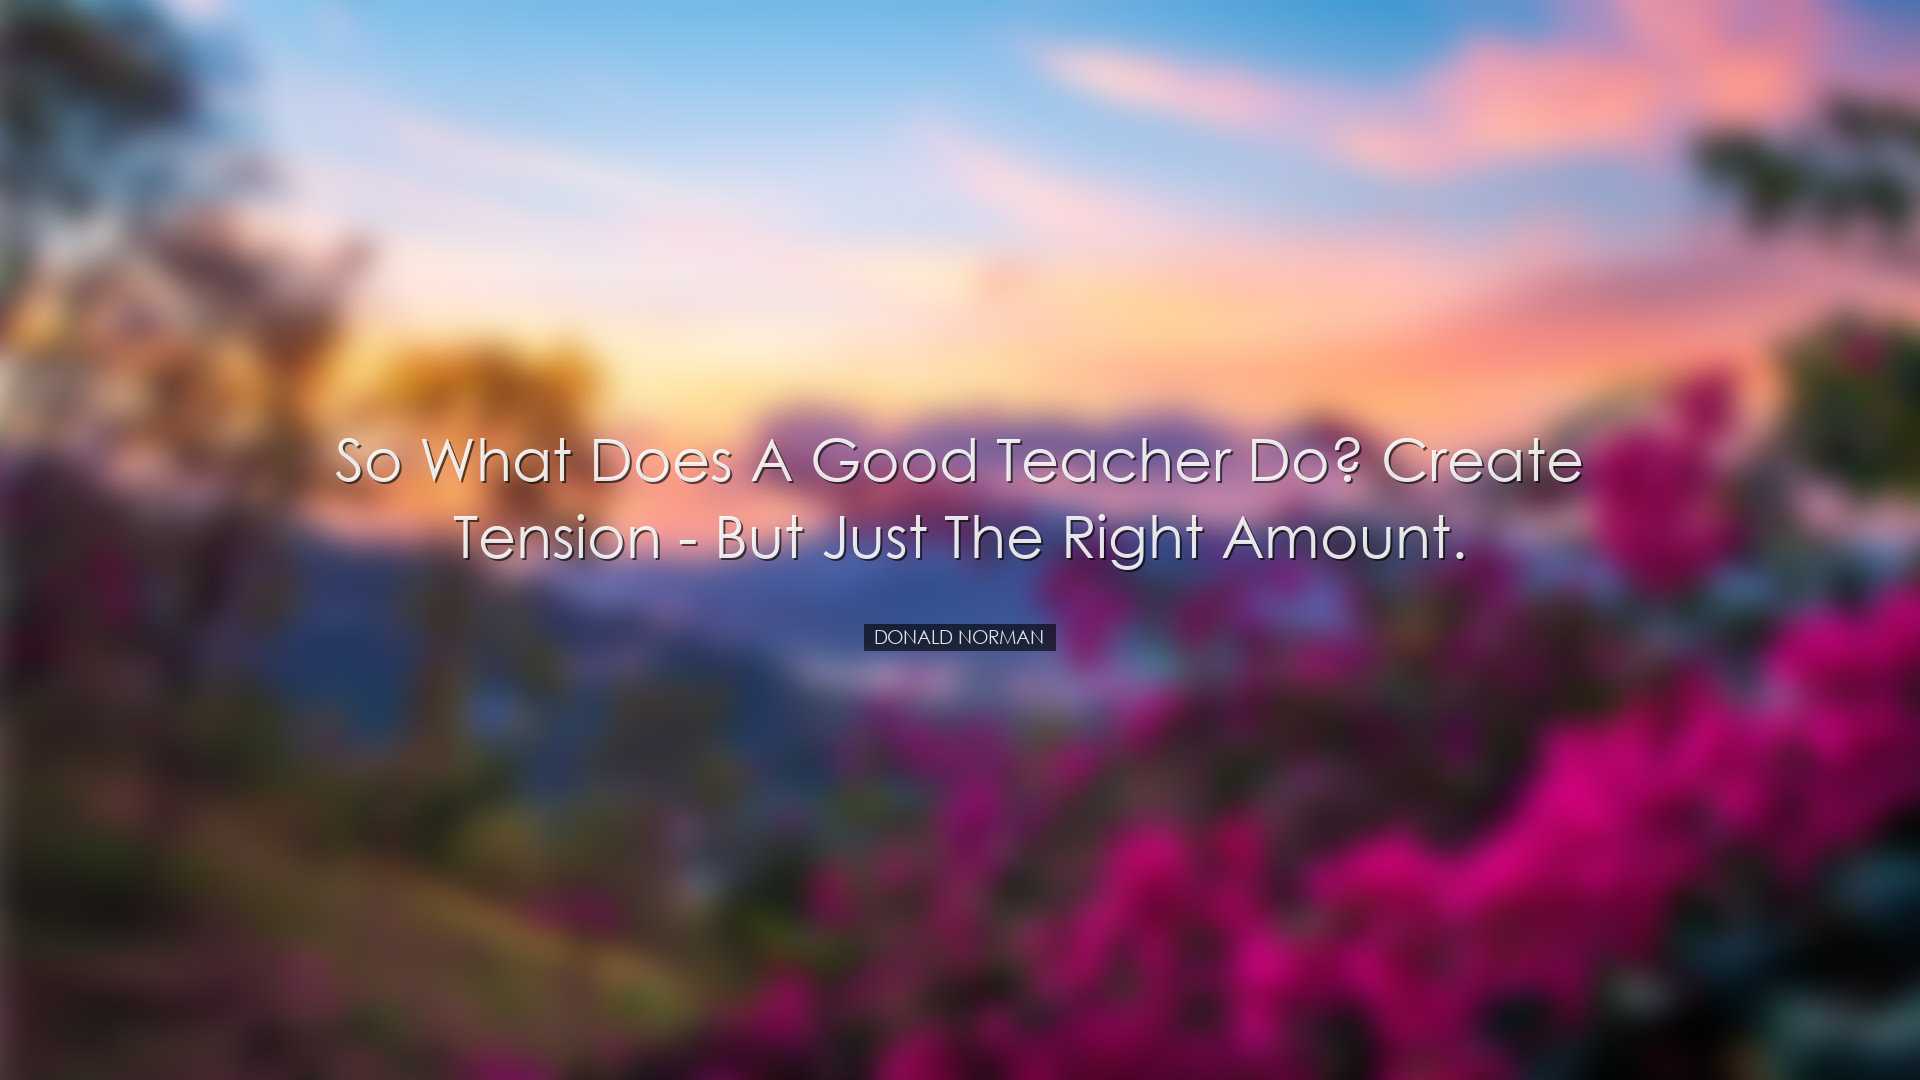 So what does a good teacher do? Create tension - but just the righ